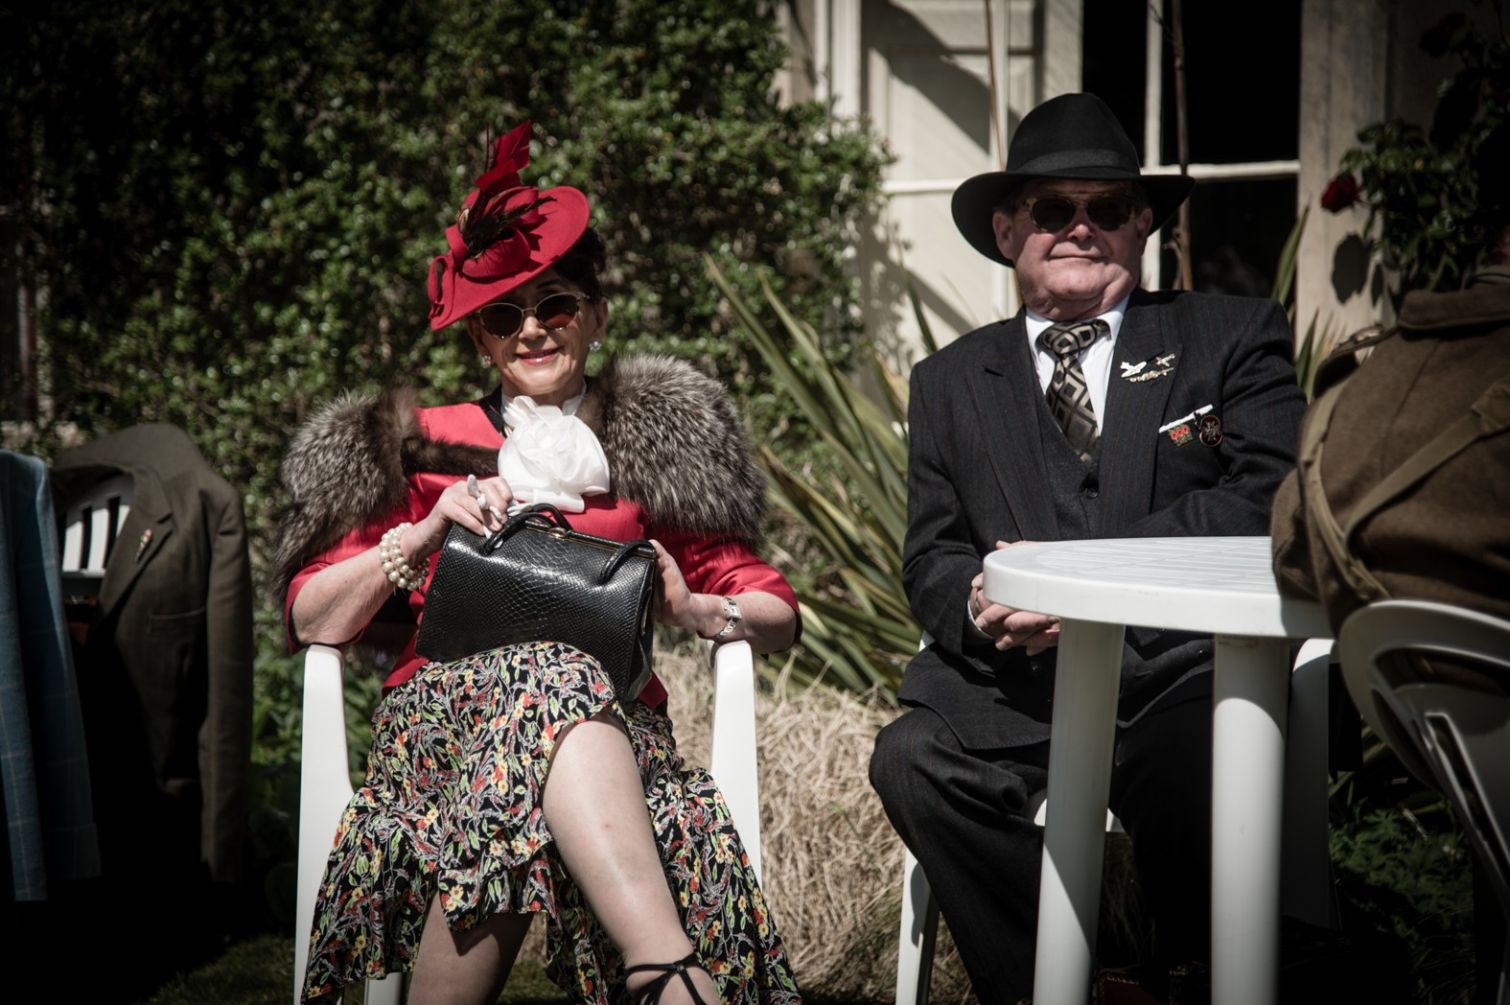 A classically dressed couple sitting enjoying a vintage festival